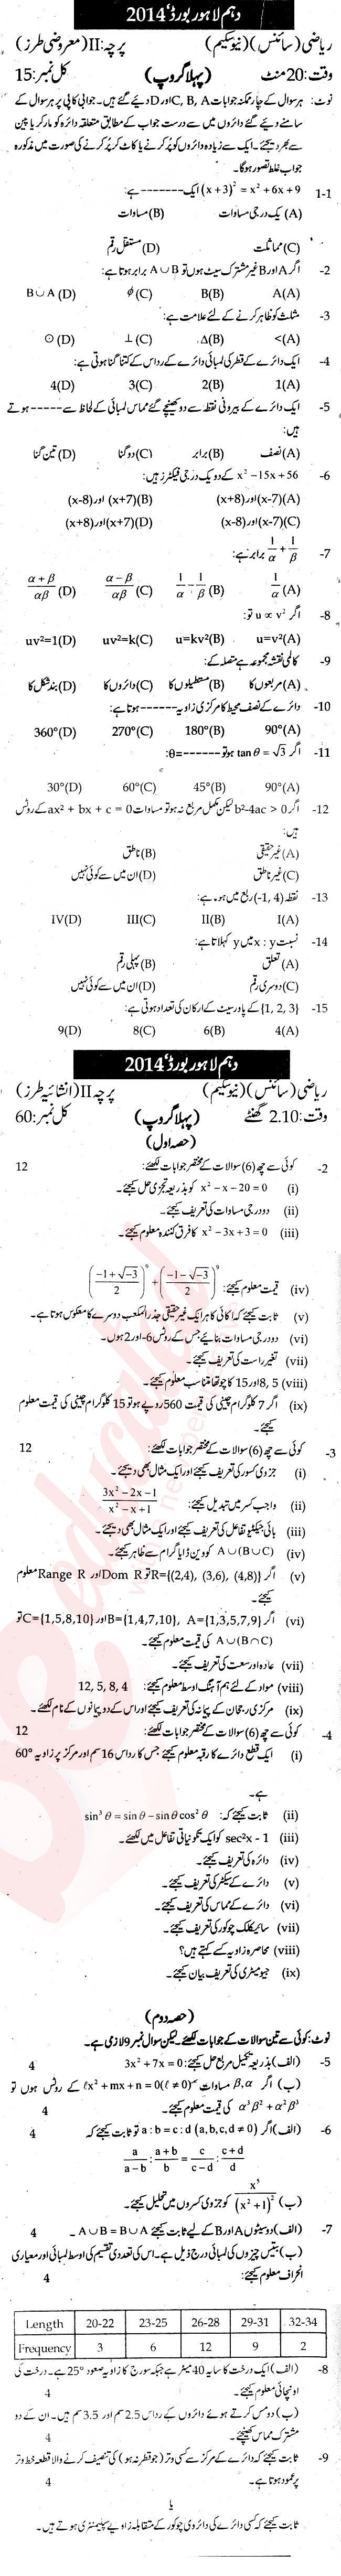 Math 10th class Past Paper Group 1 BISE Lahore 2014